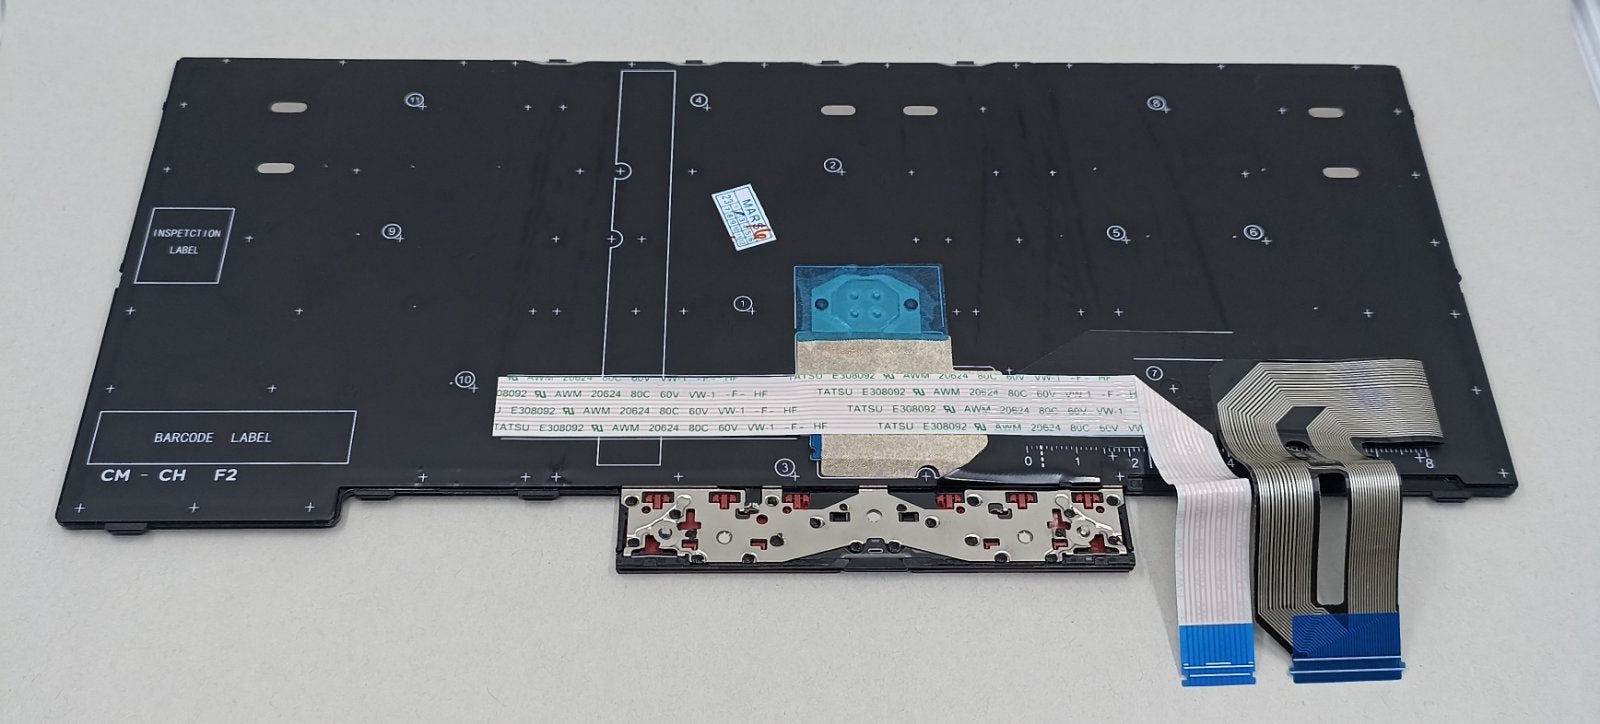 Replacement Keyboard Keys For Lenovo E480 ThinkPad A1